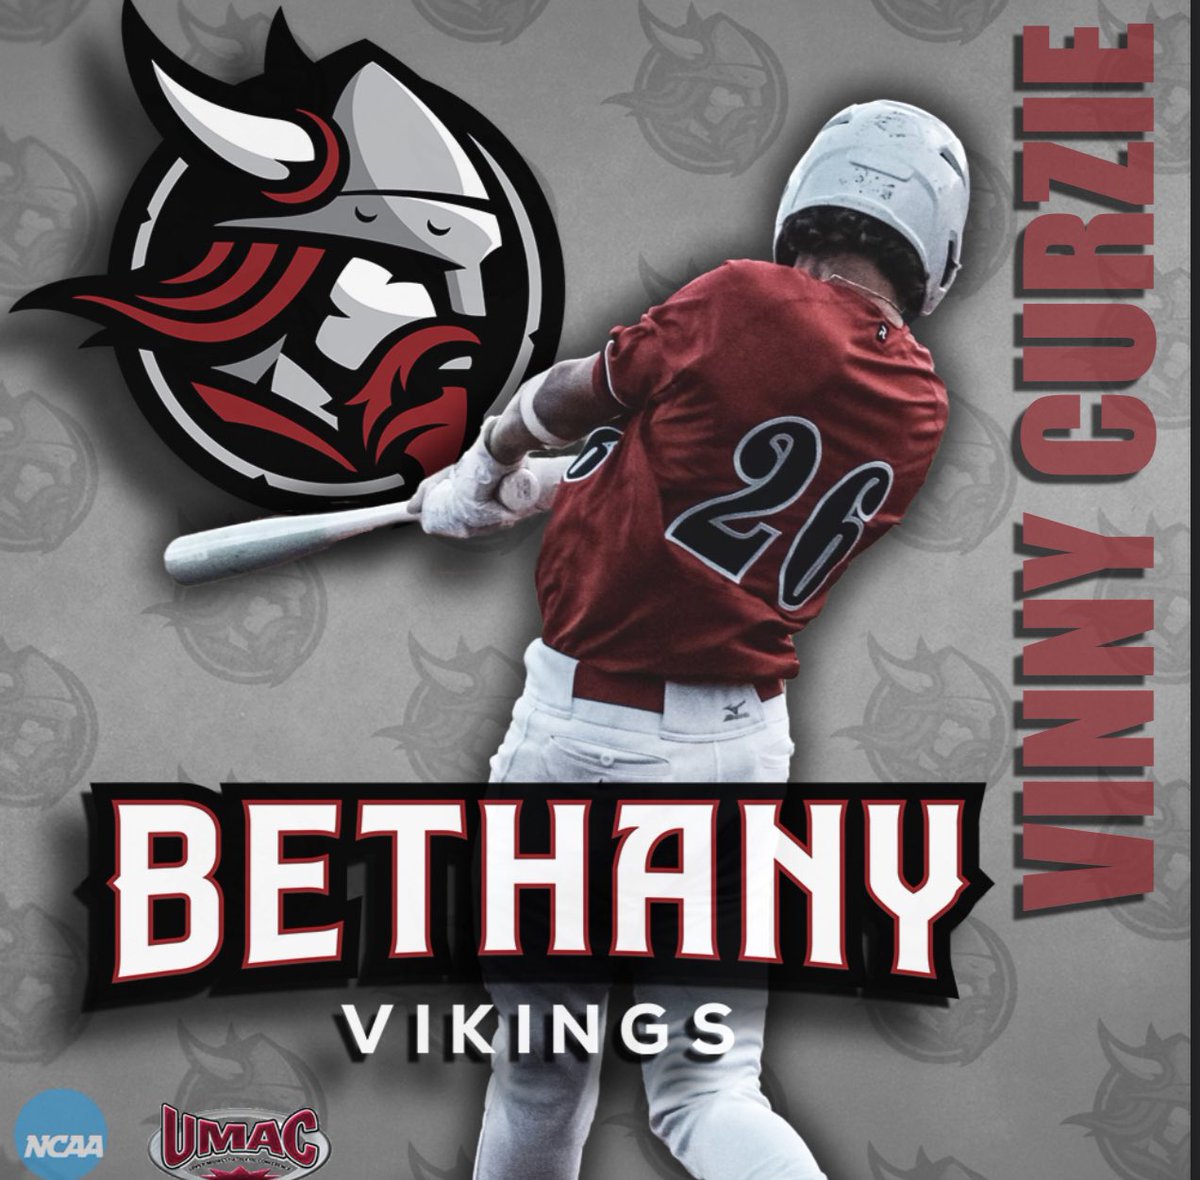 I am blessed and excited to announce I will be committing to play baseball at Bethany Lutheran College. I’d like to thank God, my family, my coaches @s_rand34 @ToddStottlemyre @coachjb13 @ChadMoellerMLB , and everyone else who has helped along the way. @ryankragh